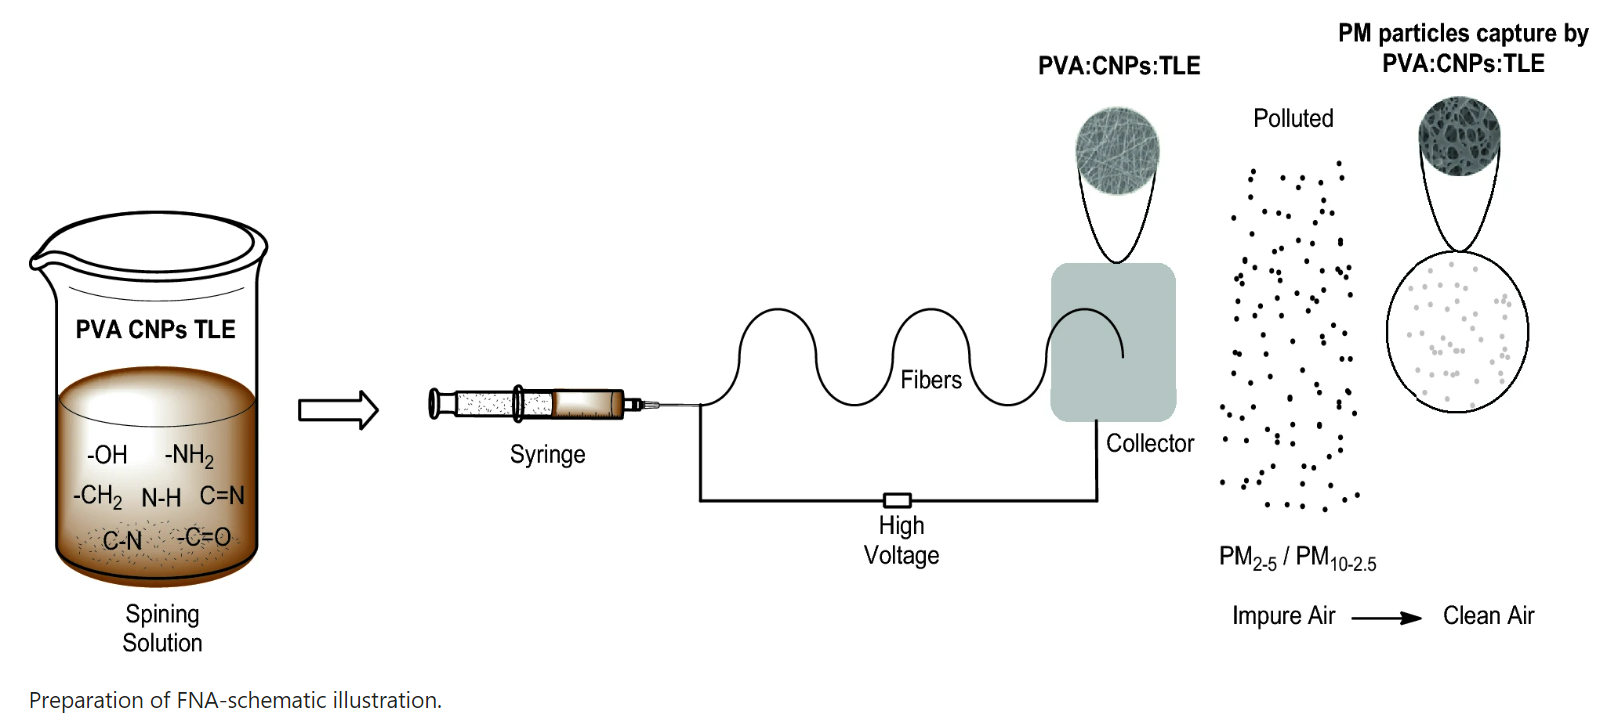 Preparation of PVA:CNP:TLE Nanofiber Filters by Electrospinning